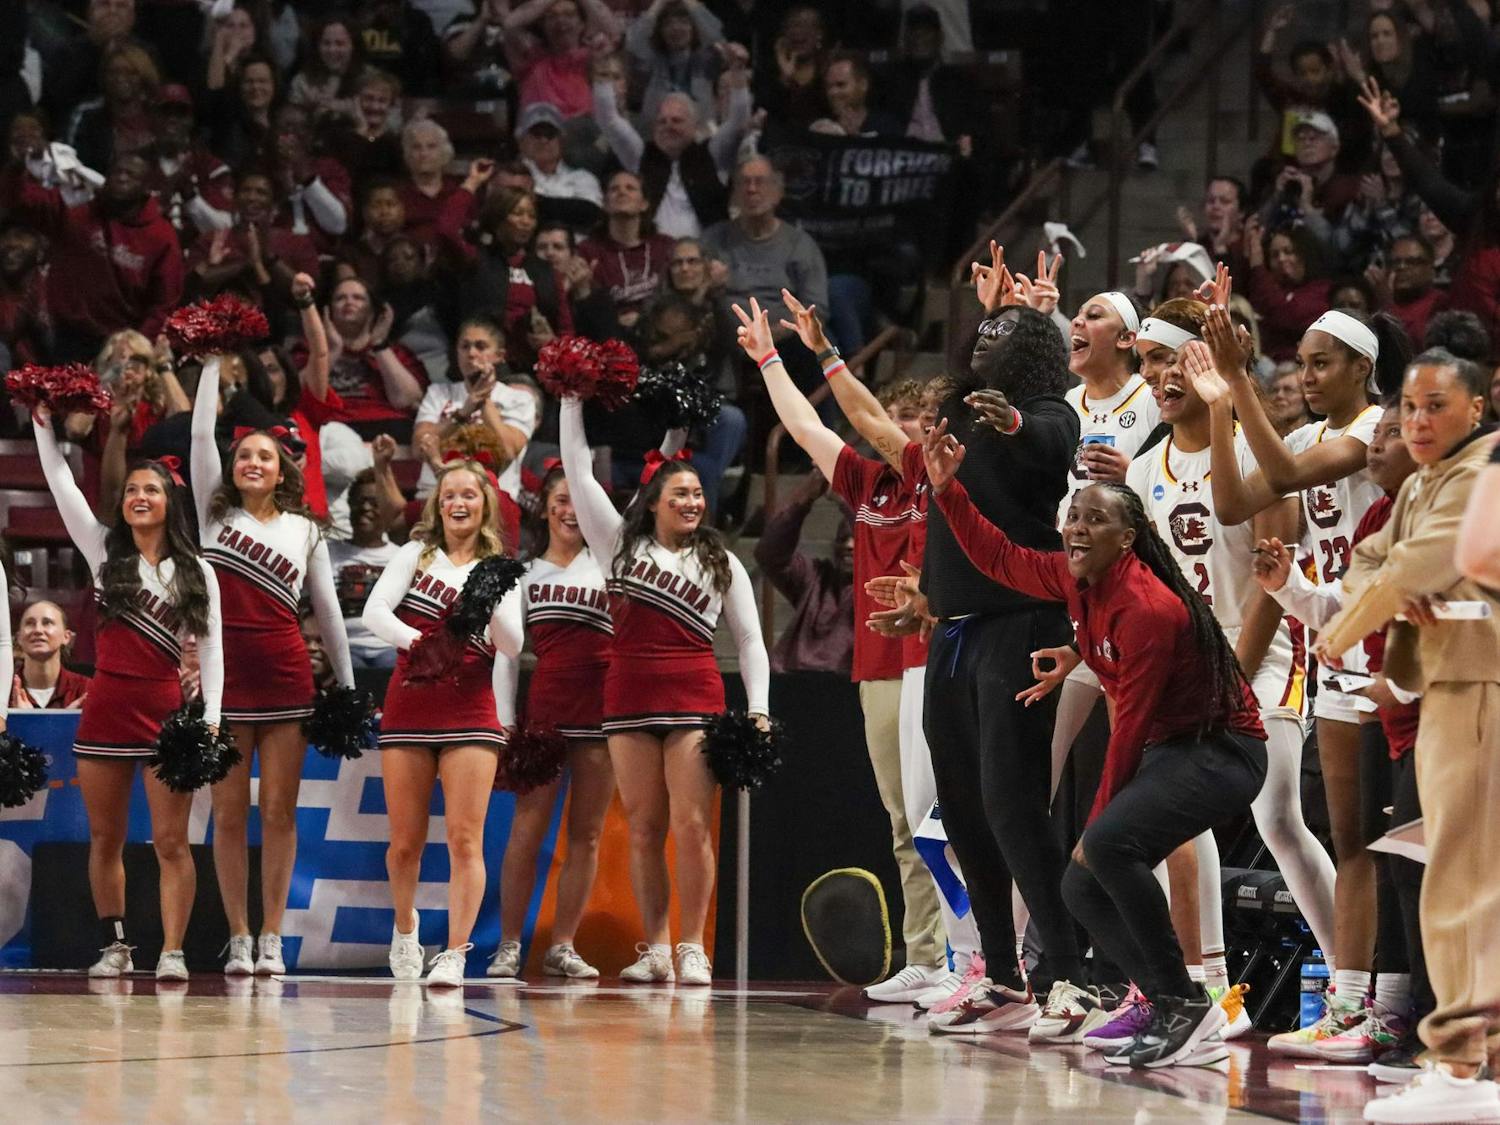 The Gamecock bench celebrates after a 3-point shot is made during South Carolina's game against North Carolina in round two of the NCAA Women's Tournament on March 24, 2024. The Gamecocks put up nine 3-pointers in its 88-41 victory over the Tar Heels.